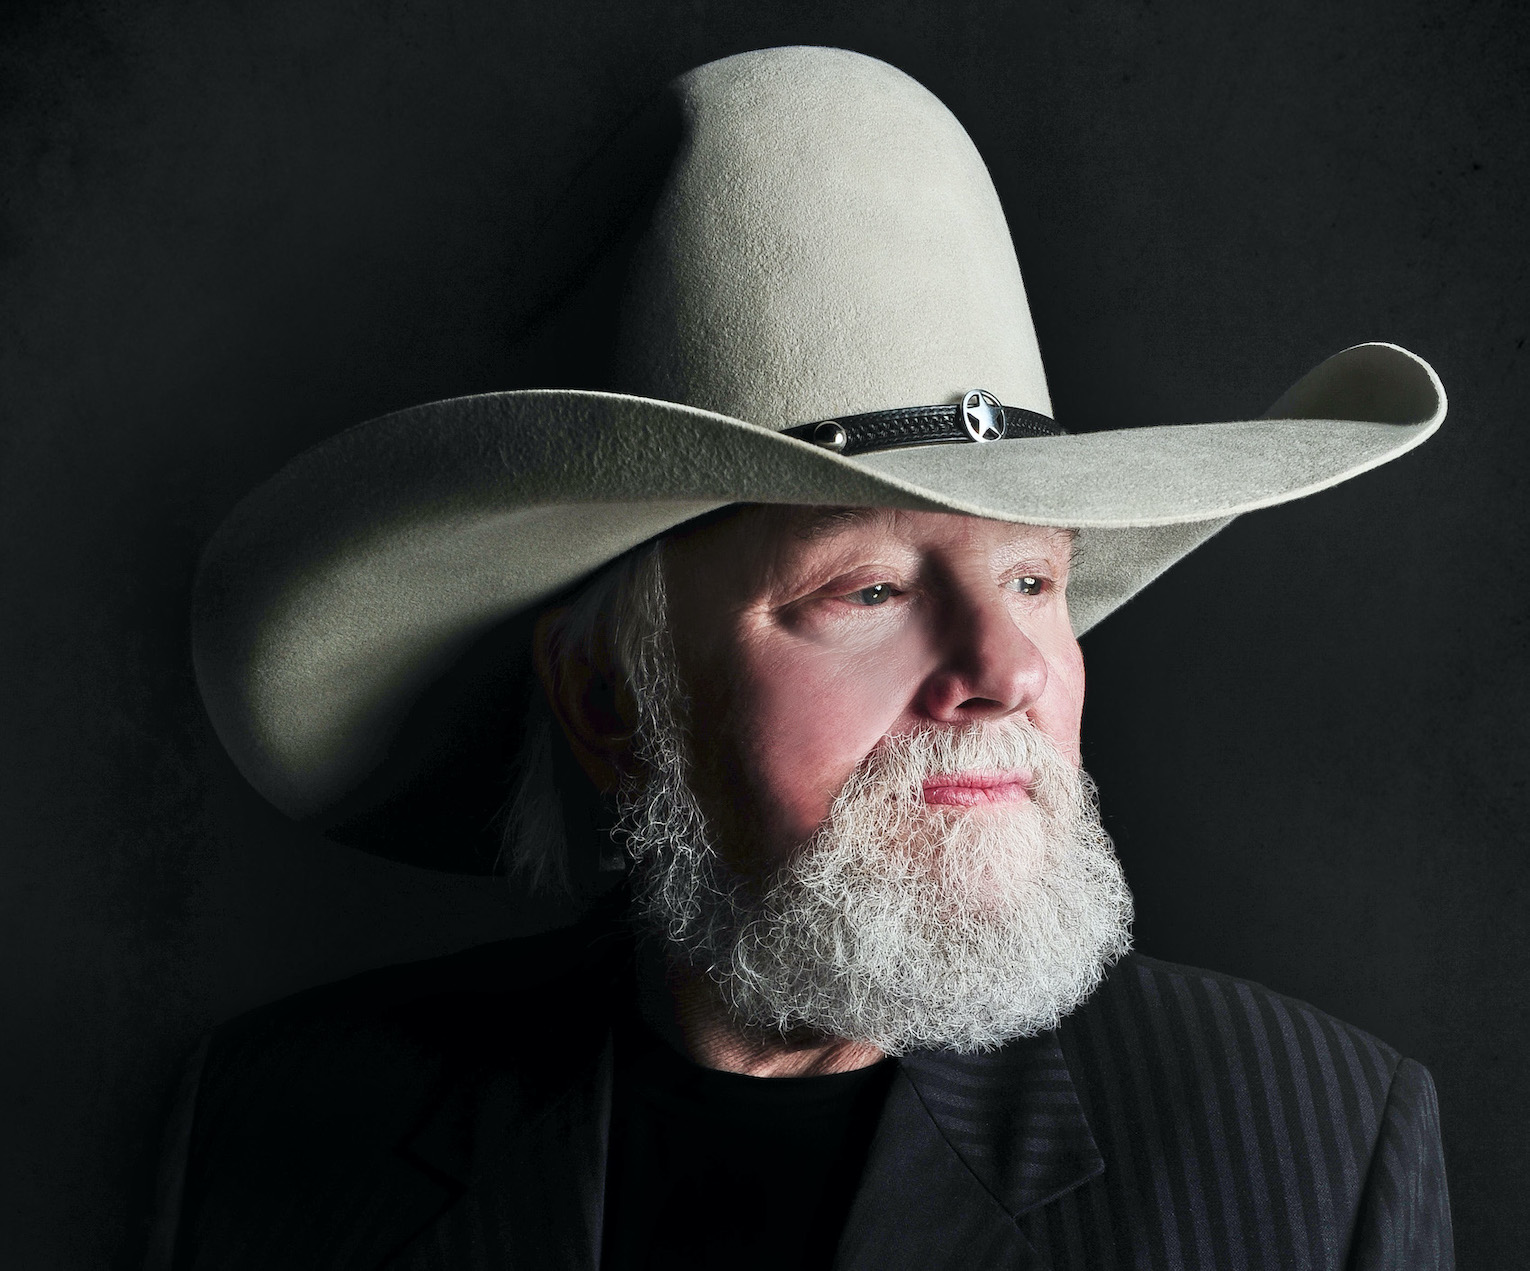 Charlie Daniels (Photo credit: Erick Anderson / eafoto / courtesy of Absolute Publicity)